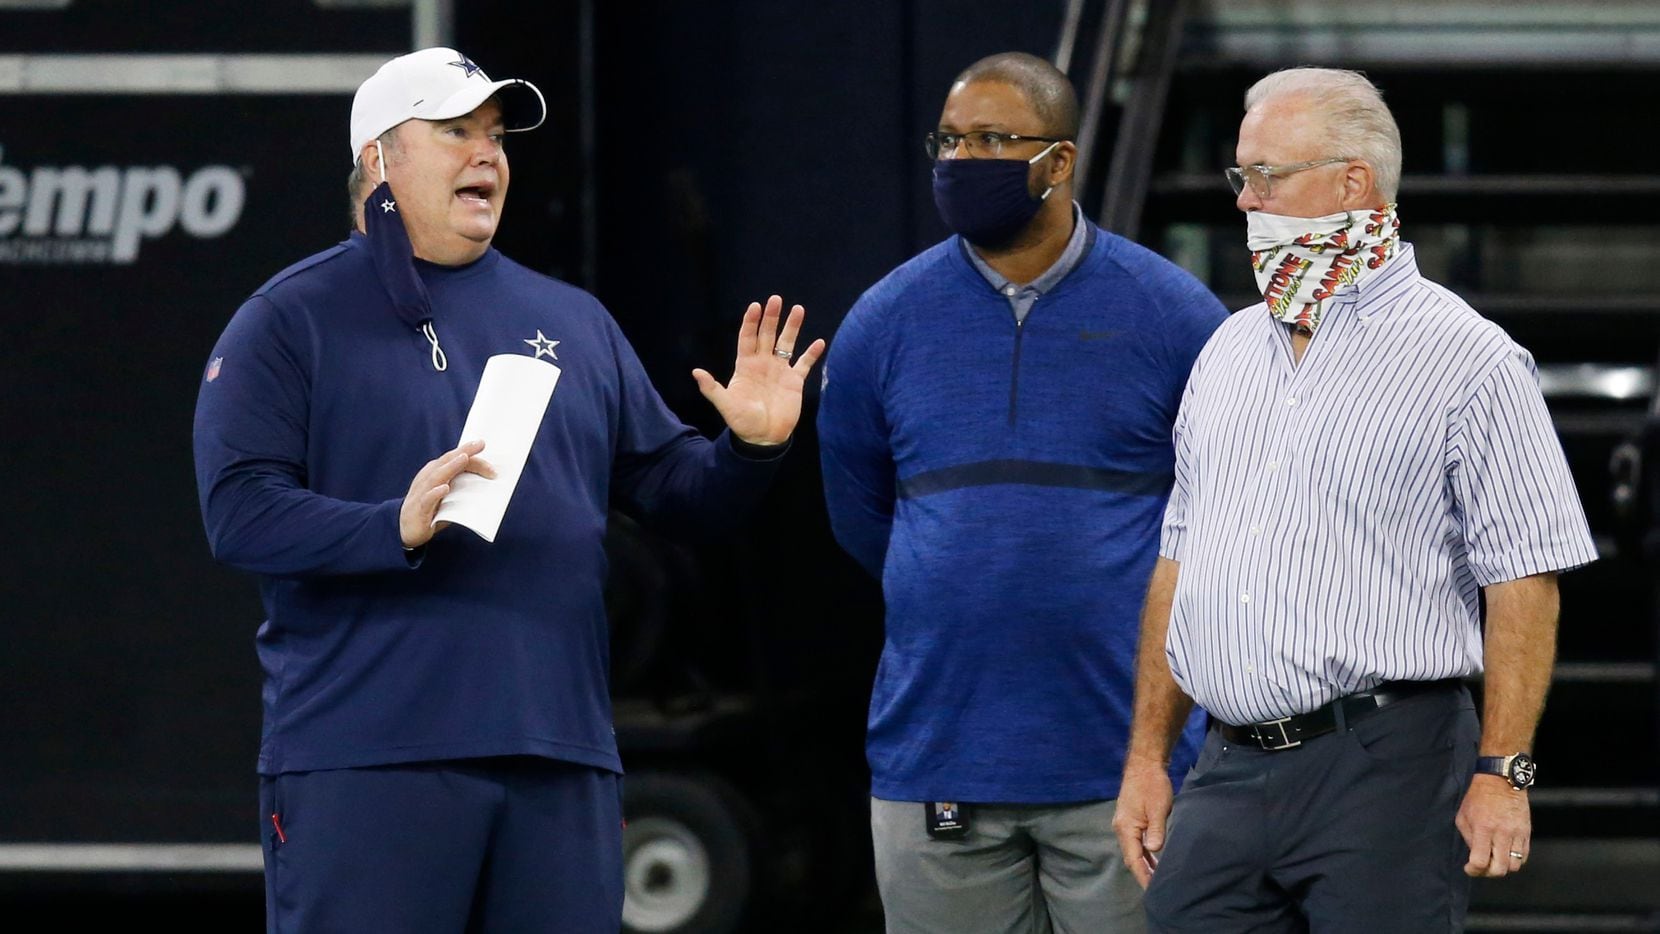 Dallas Cowboys head coach Mike McCarthy talks with Dallas Cowboys vice president of player personnel Will McClay and Dallas Cowboys executive vice president Stephen Jones during training camp at the Dallas Cowboys headquarters at The Star in Frisco, Texas on Friday, August 28, 2020.